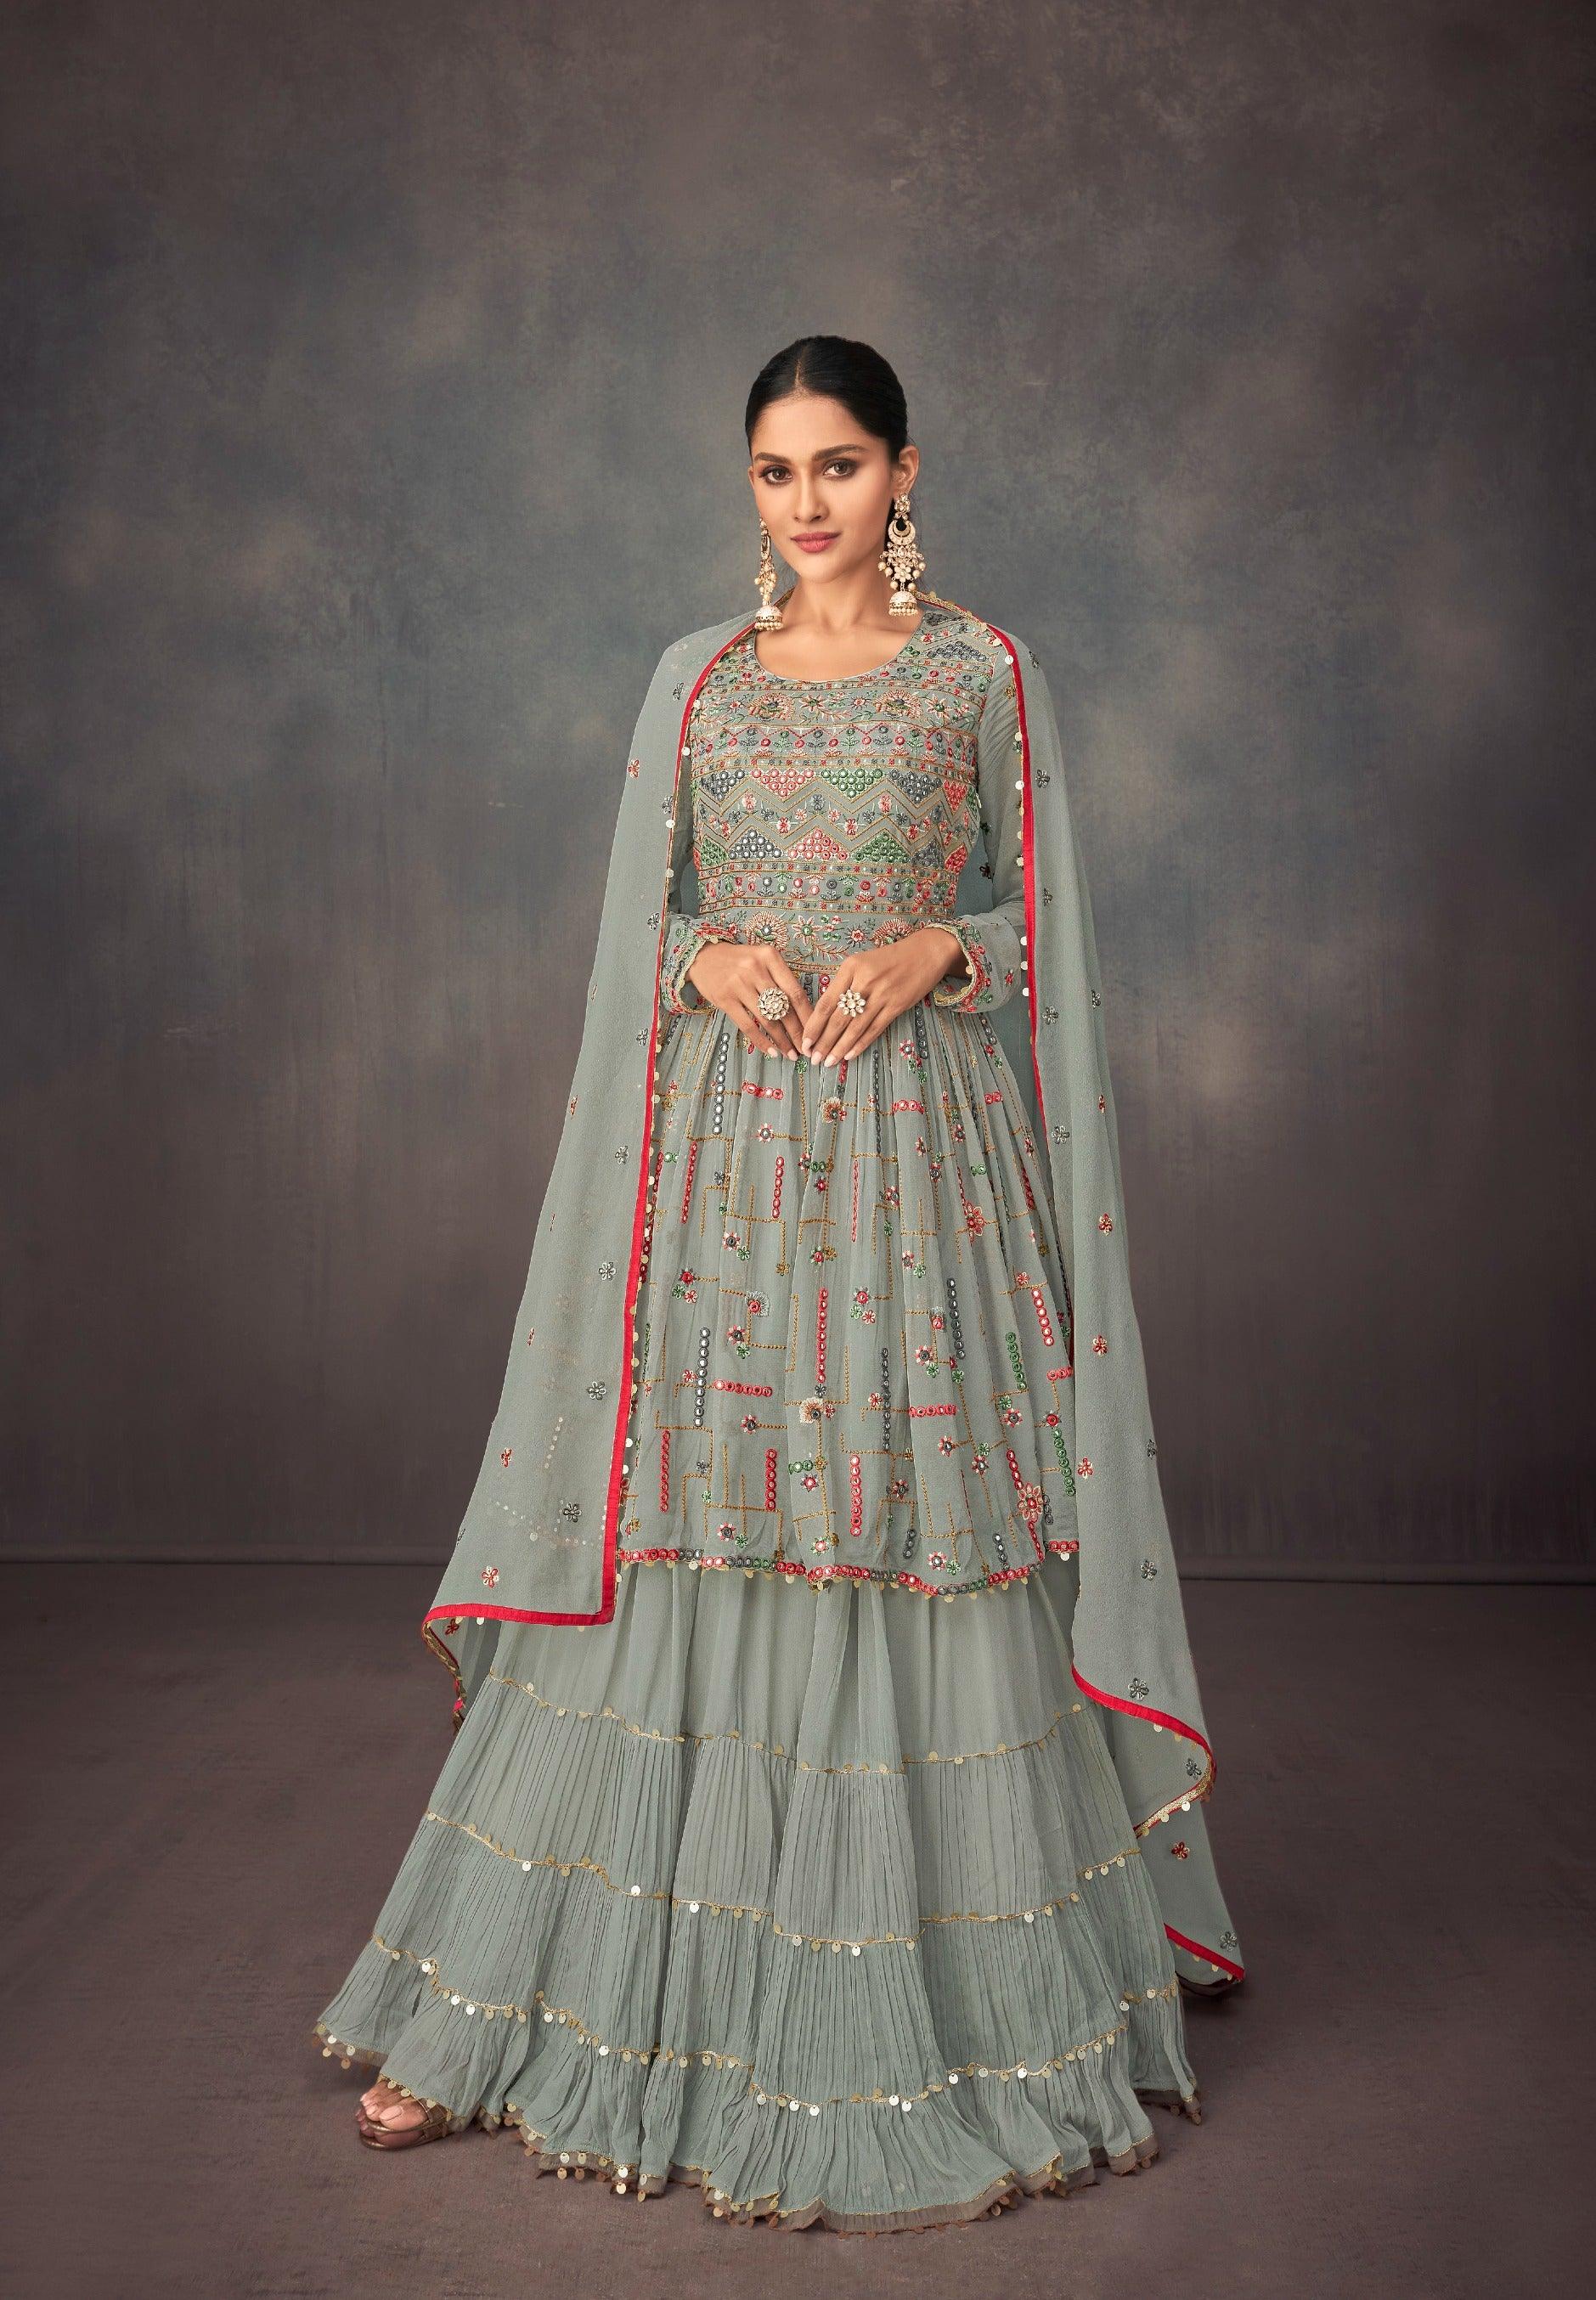 Beautiful Chanderi- Silk Kurti With skirt and embellished with embroidery  and dupatta. | Skirt design, Beautiful dress designs, Indian designer wear